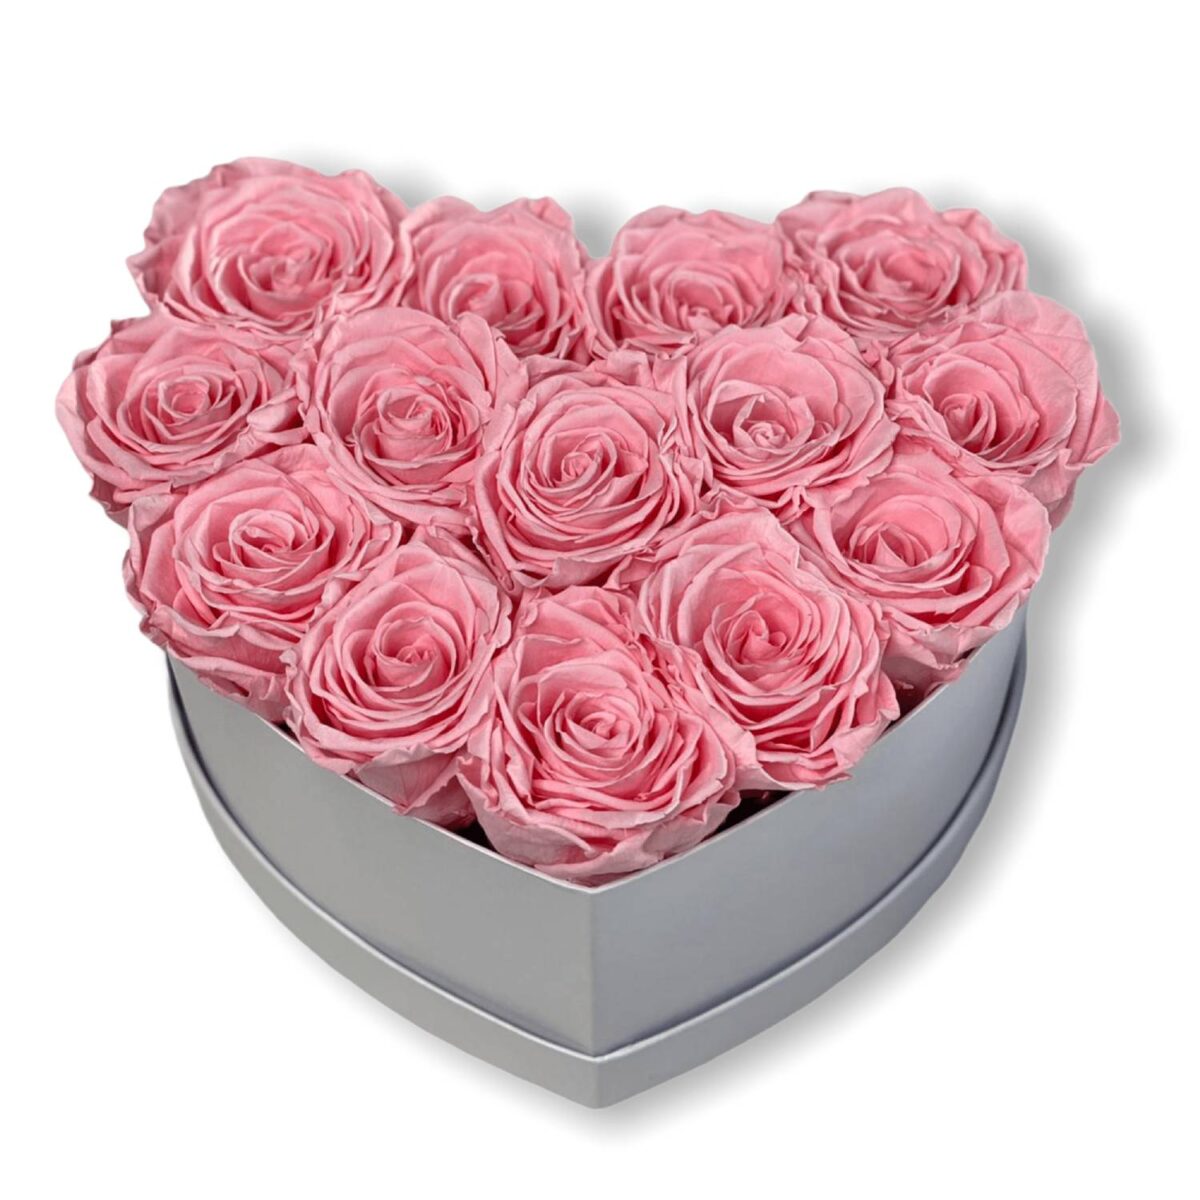 pink infinity roses in a heart shaped box S